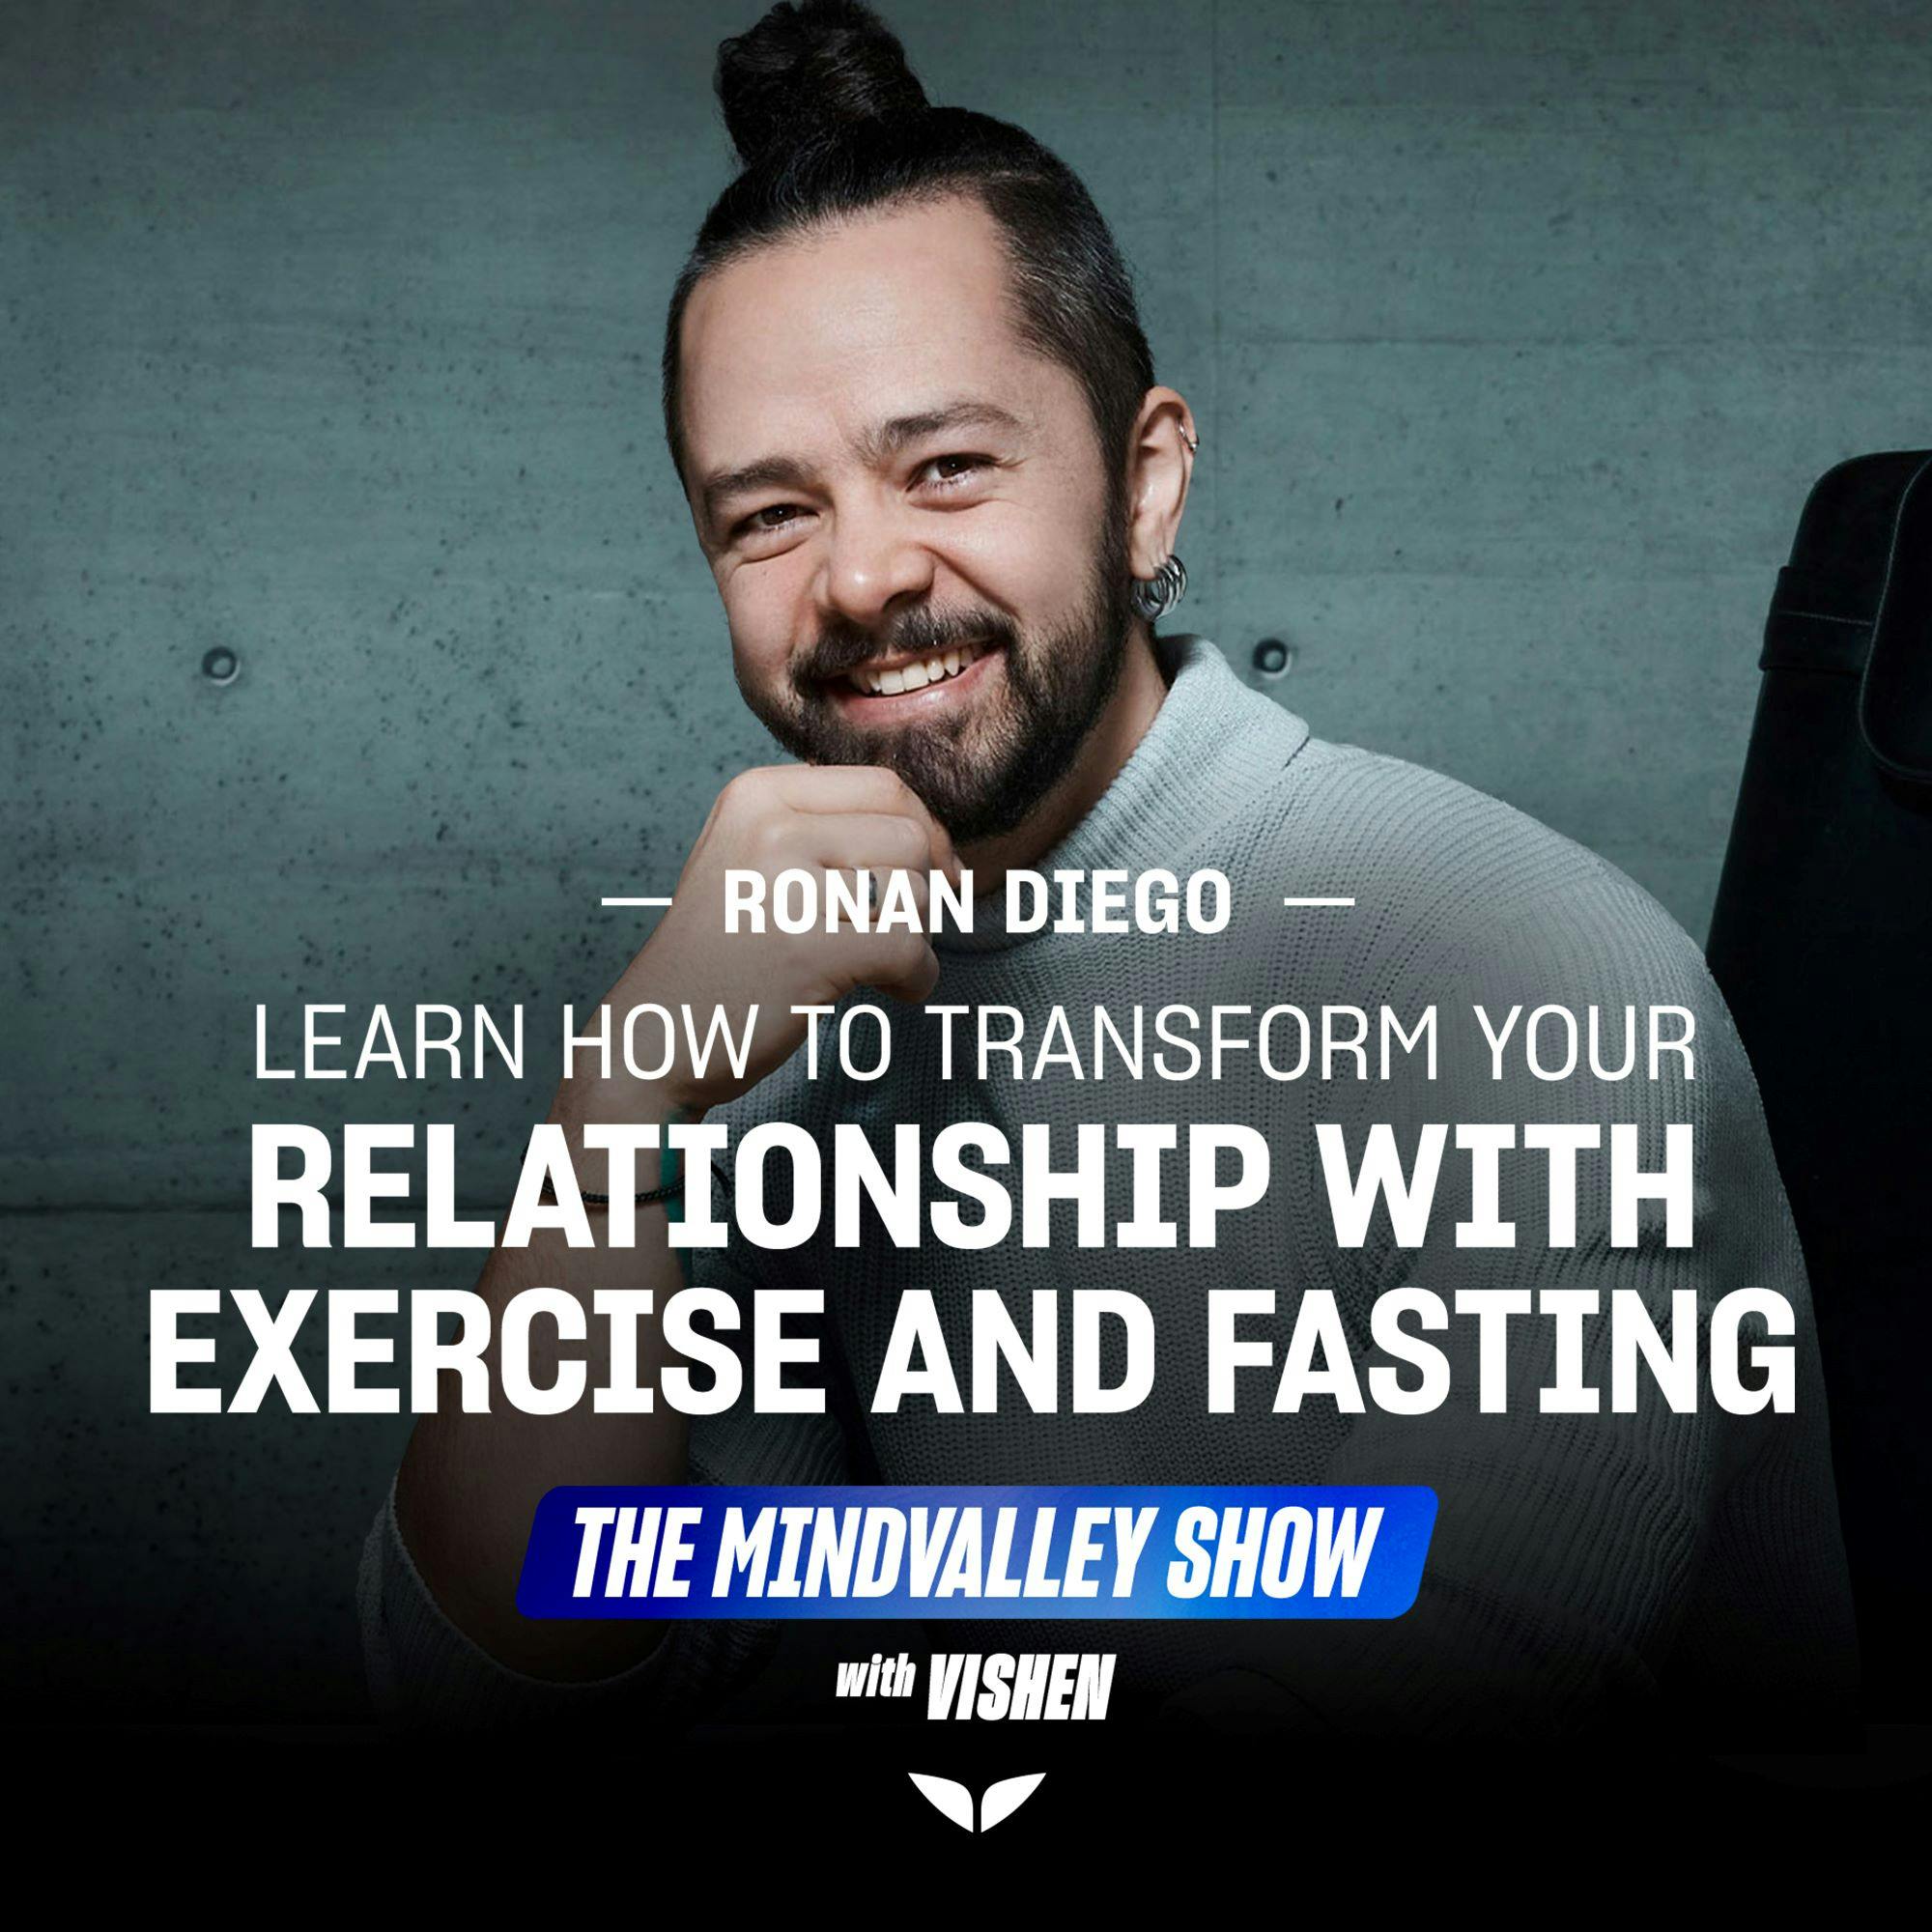 Learn How To Transform Your Relationship with Exercise and Fasting